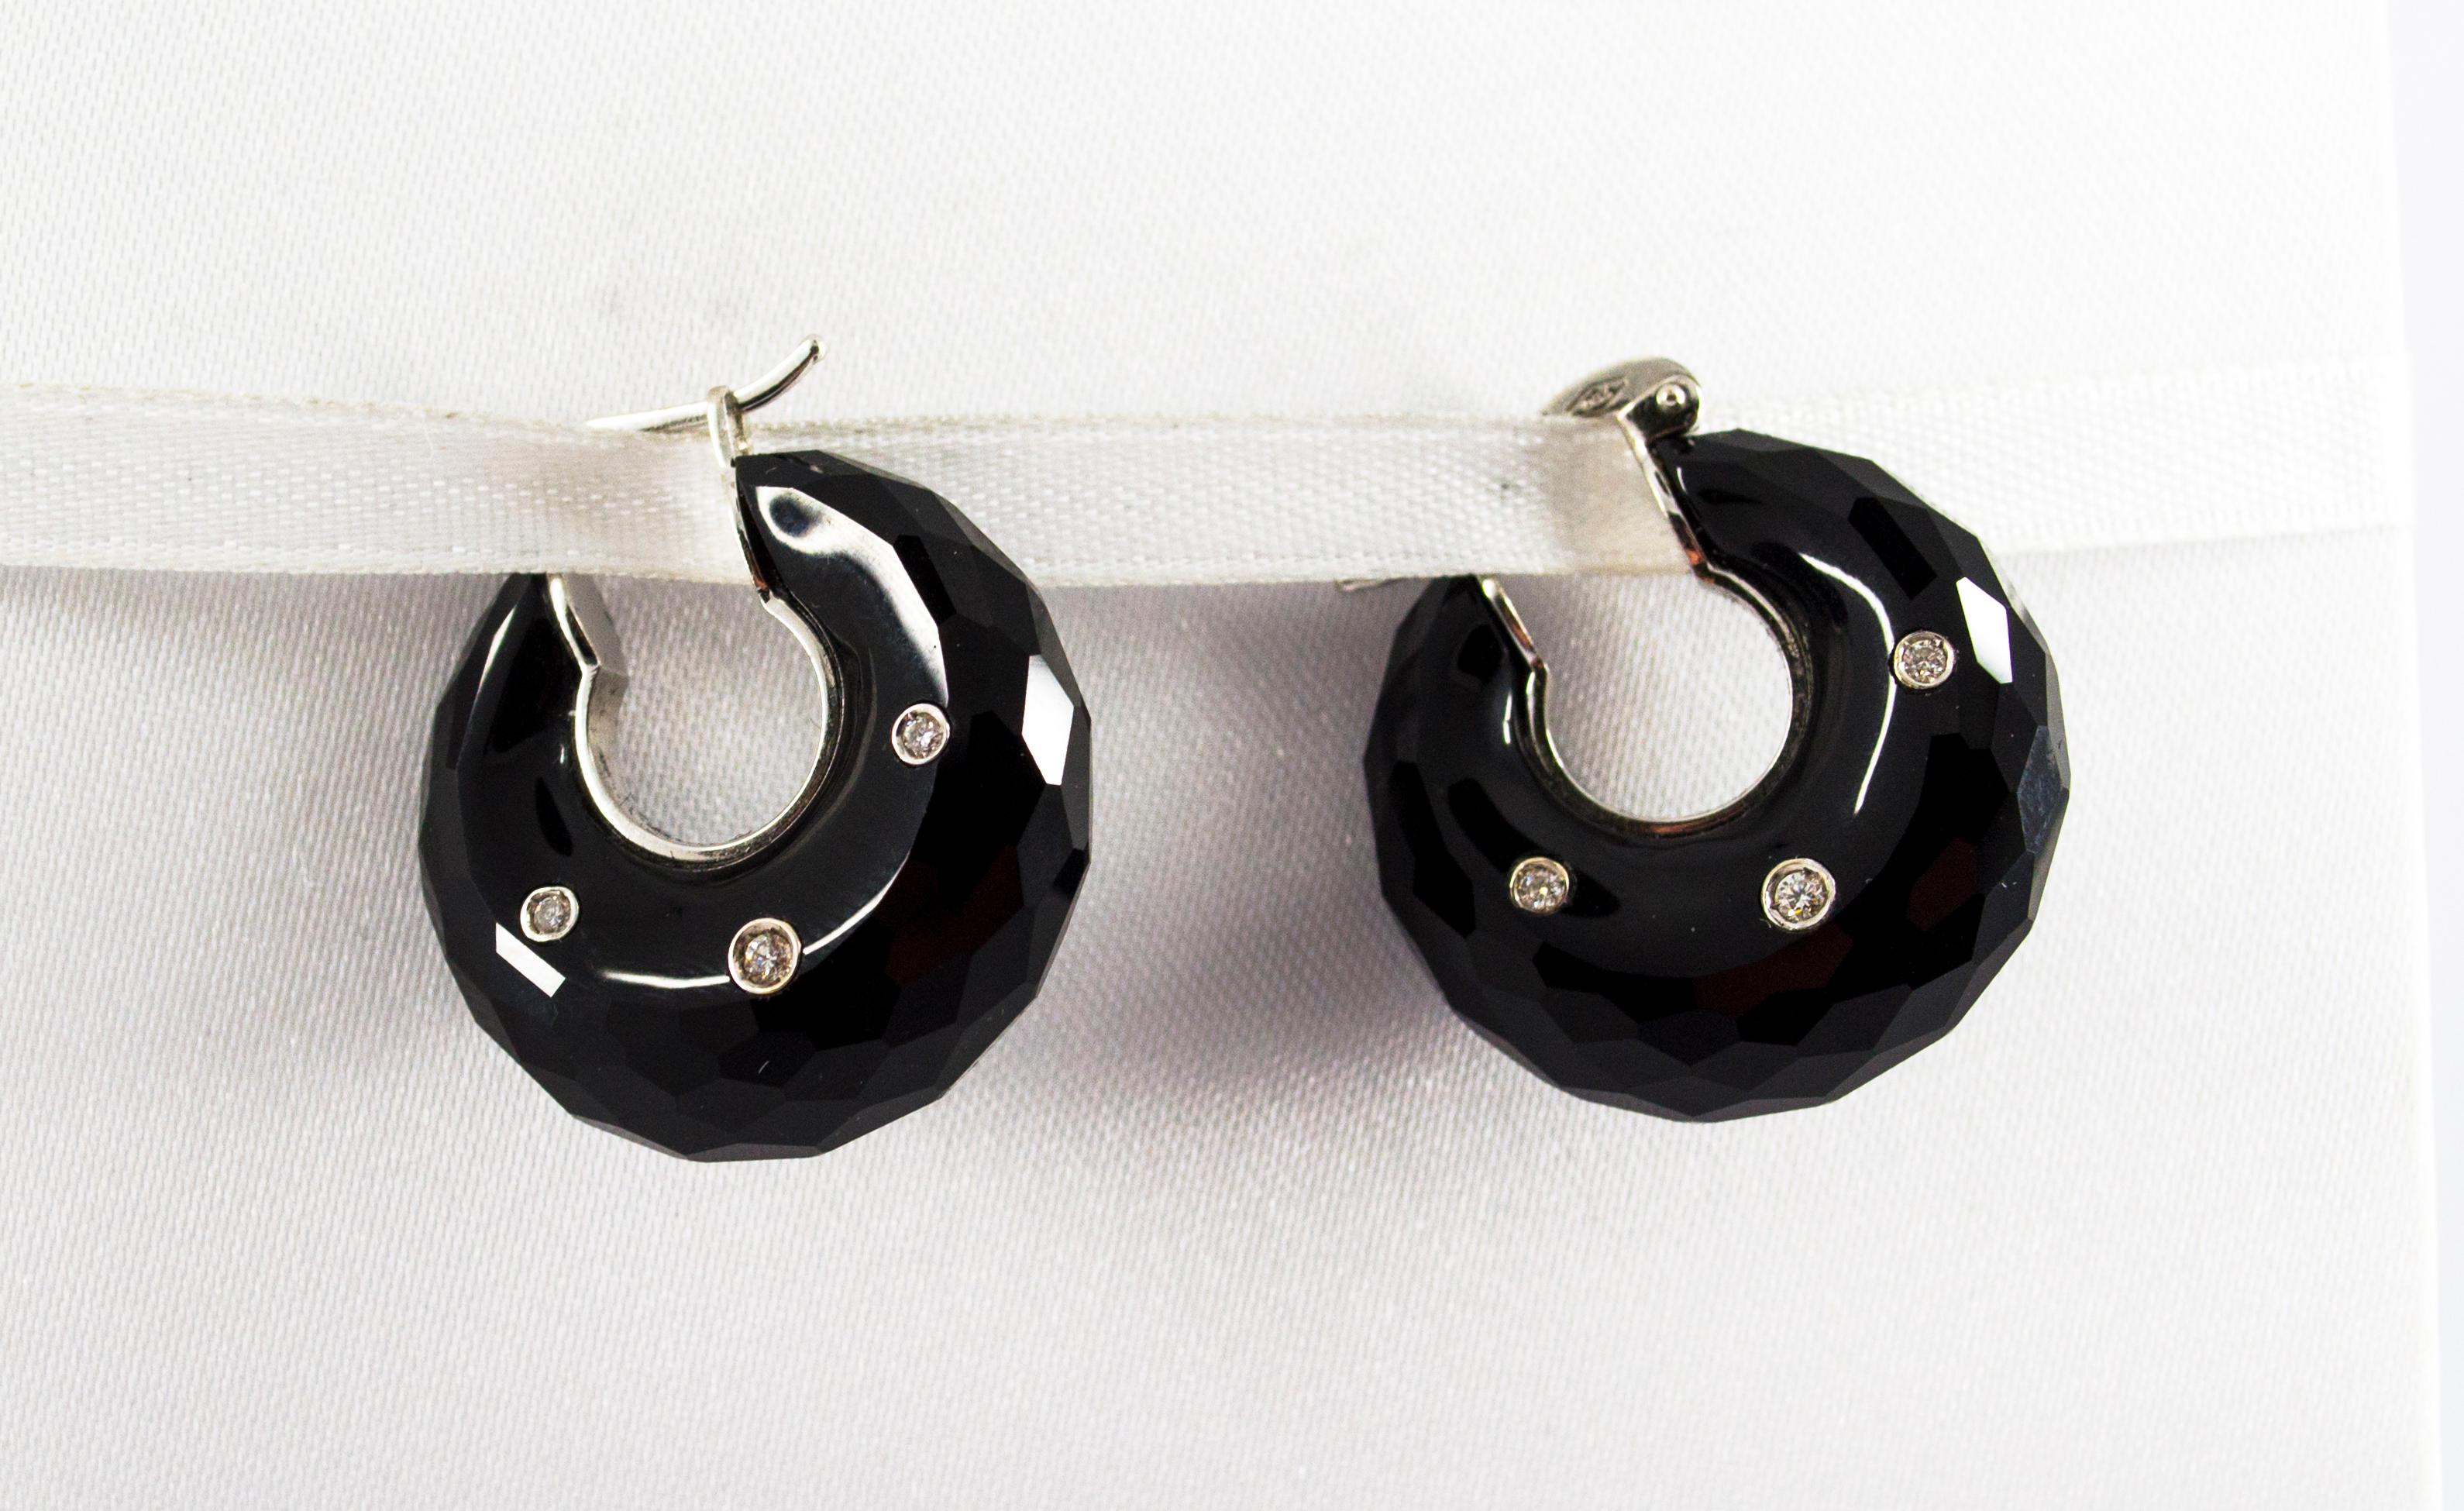 These Earrings are made of 18K White Gold.
These Earrings have 0.20 Carats of White Brilliant Cut Diamonds.
These Earrings have also Onyx.

All our Earrings have pins for pierced ears but we can change the closure and make any of our Earrings